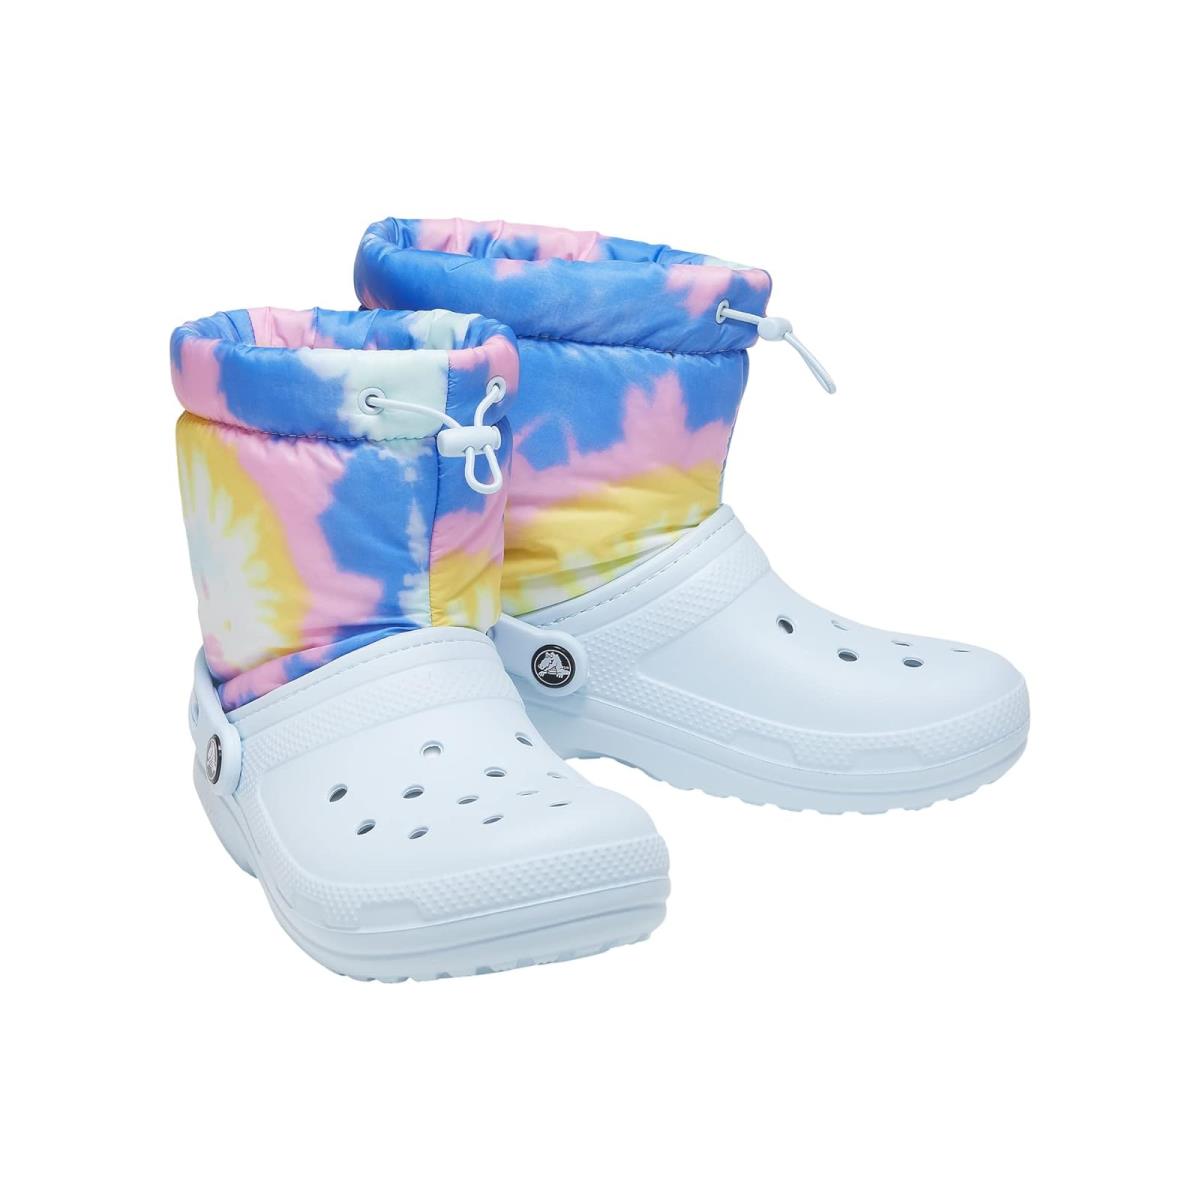 Unisex Boots Crocs Classic Lined Neo Puff Boot Mineral Blue/Tie-Dye